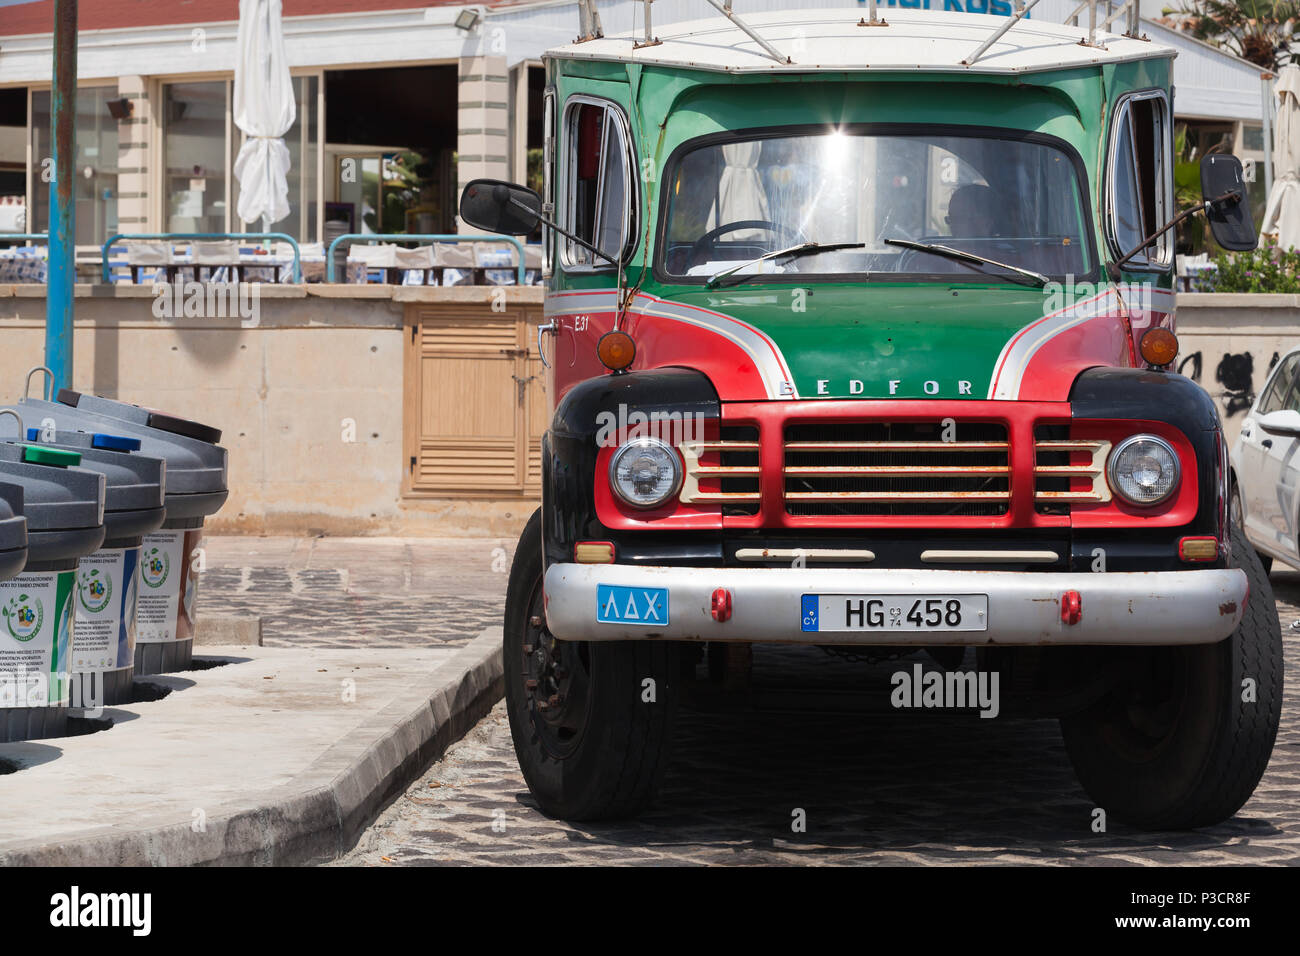 Ayia Napa, Cyprus - June 12, 2018: Old Bedford TJ Bus, close-up front view. Bedford Vehicles, was a brand of vehicle produced by Vauxhall Motors Stock Photo